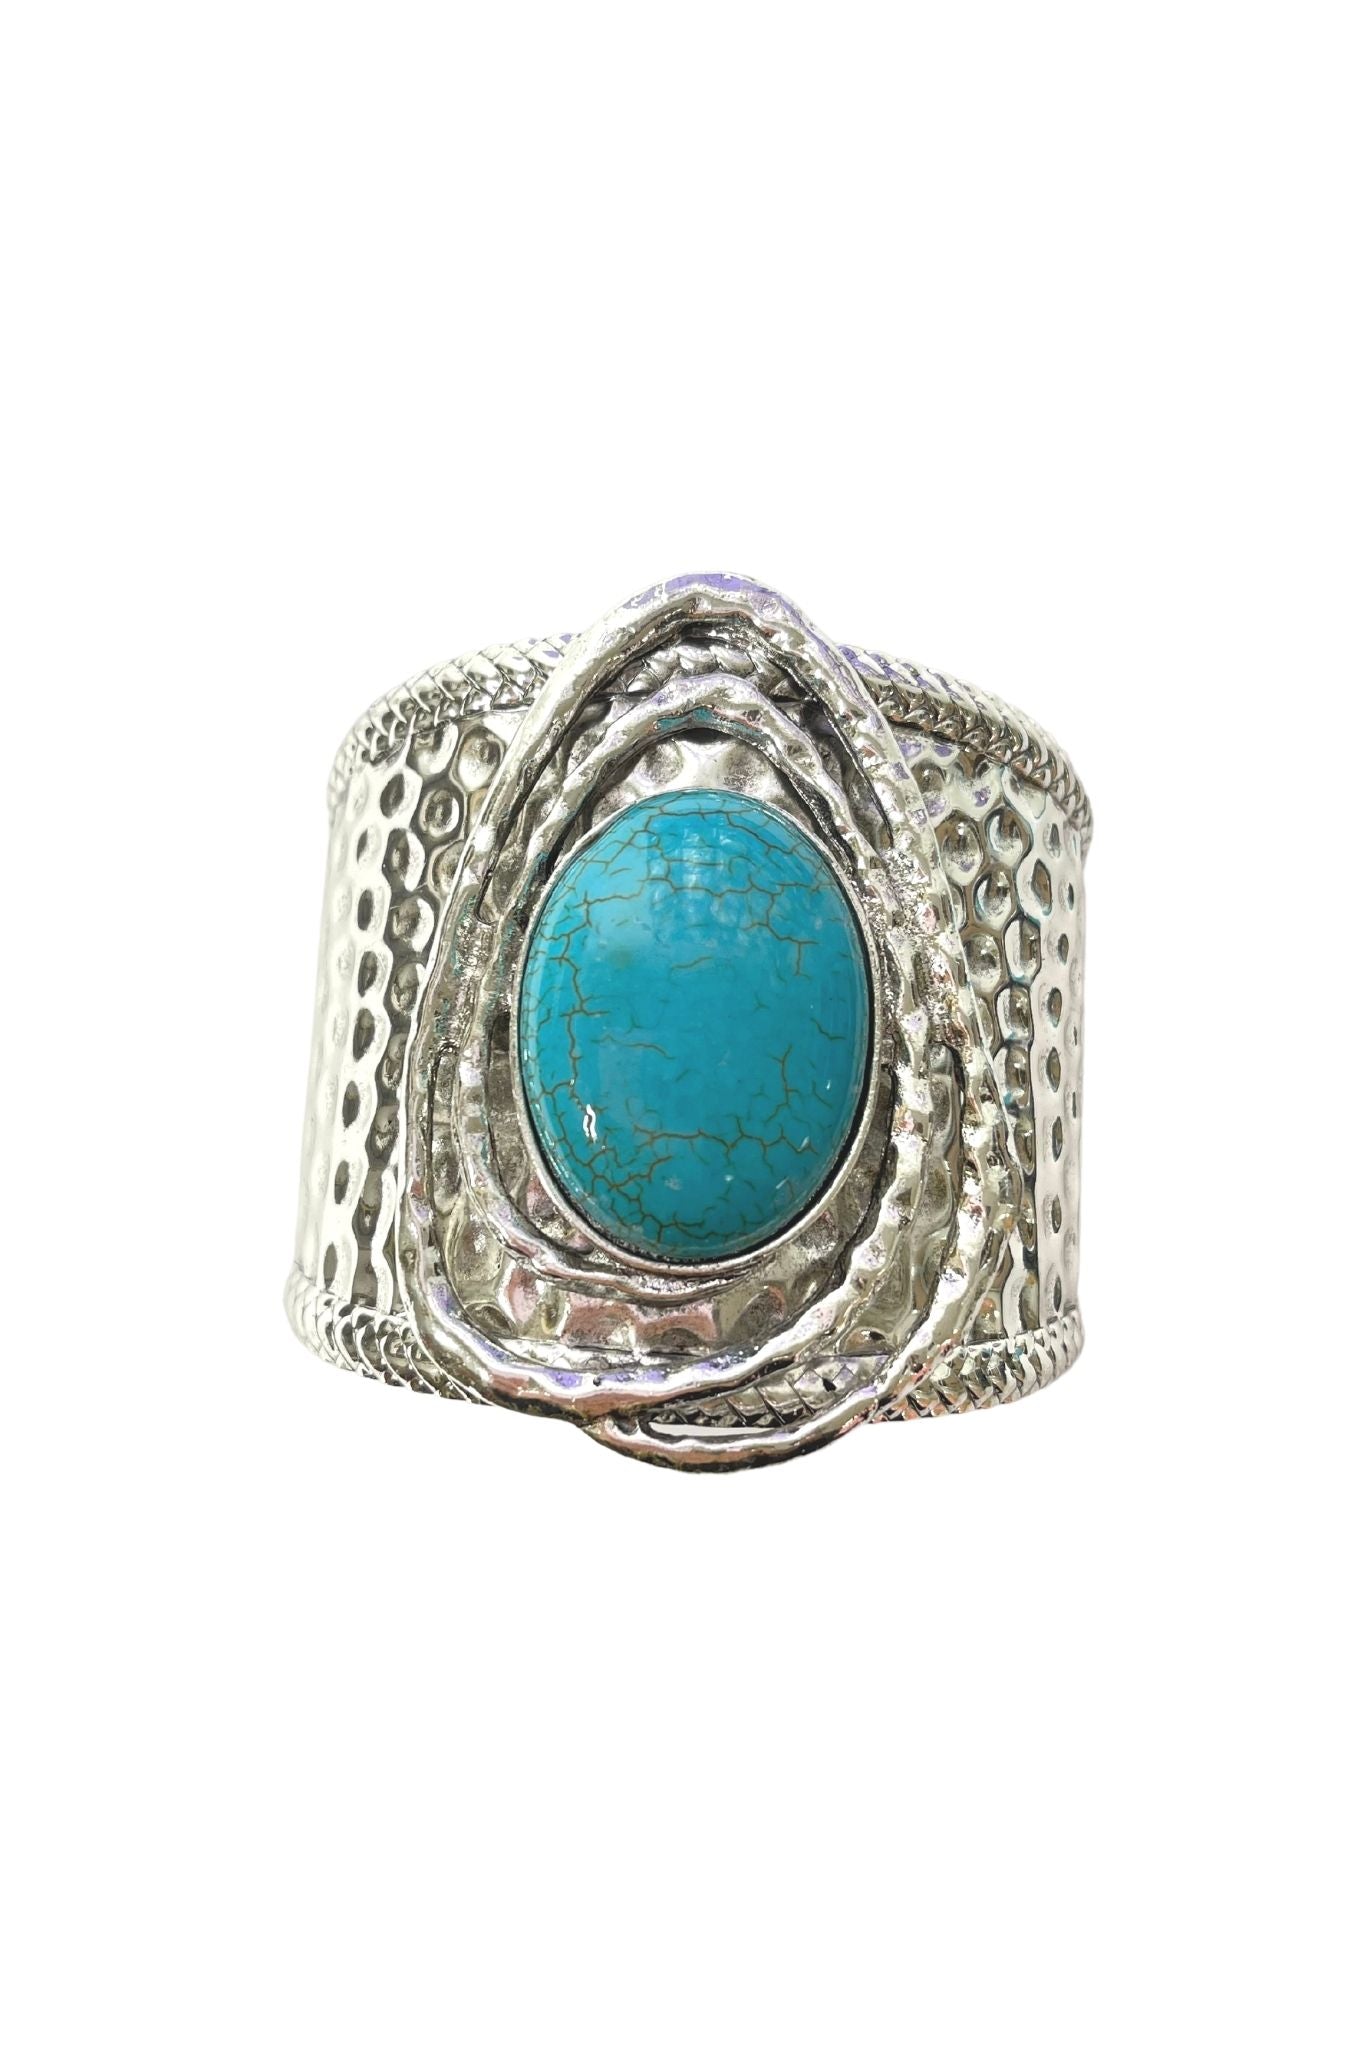 Turquoise And Silver Oversized Western Cuff Bracelet*FINAL SALE*